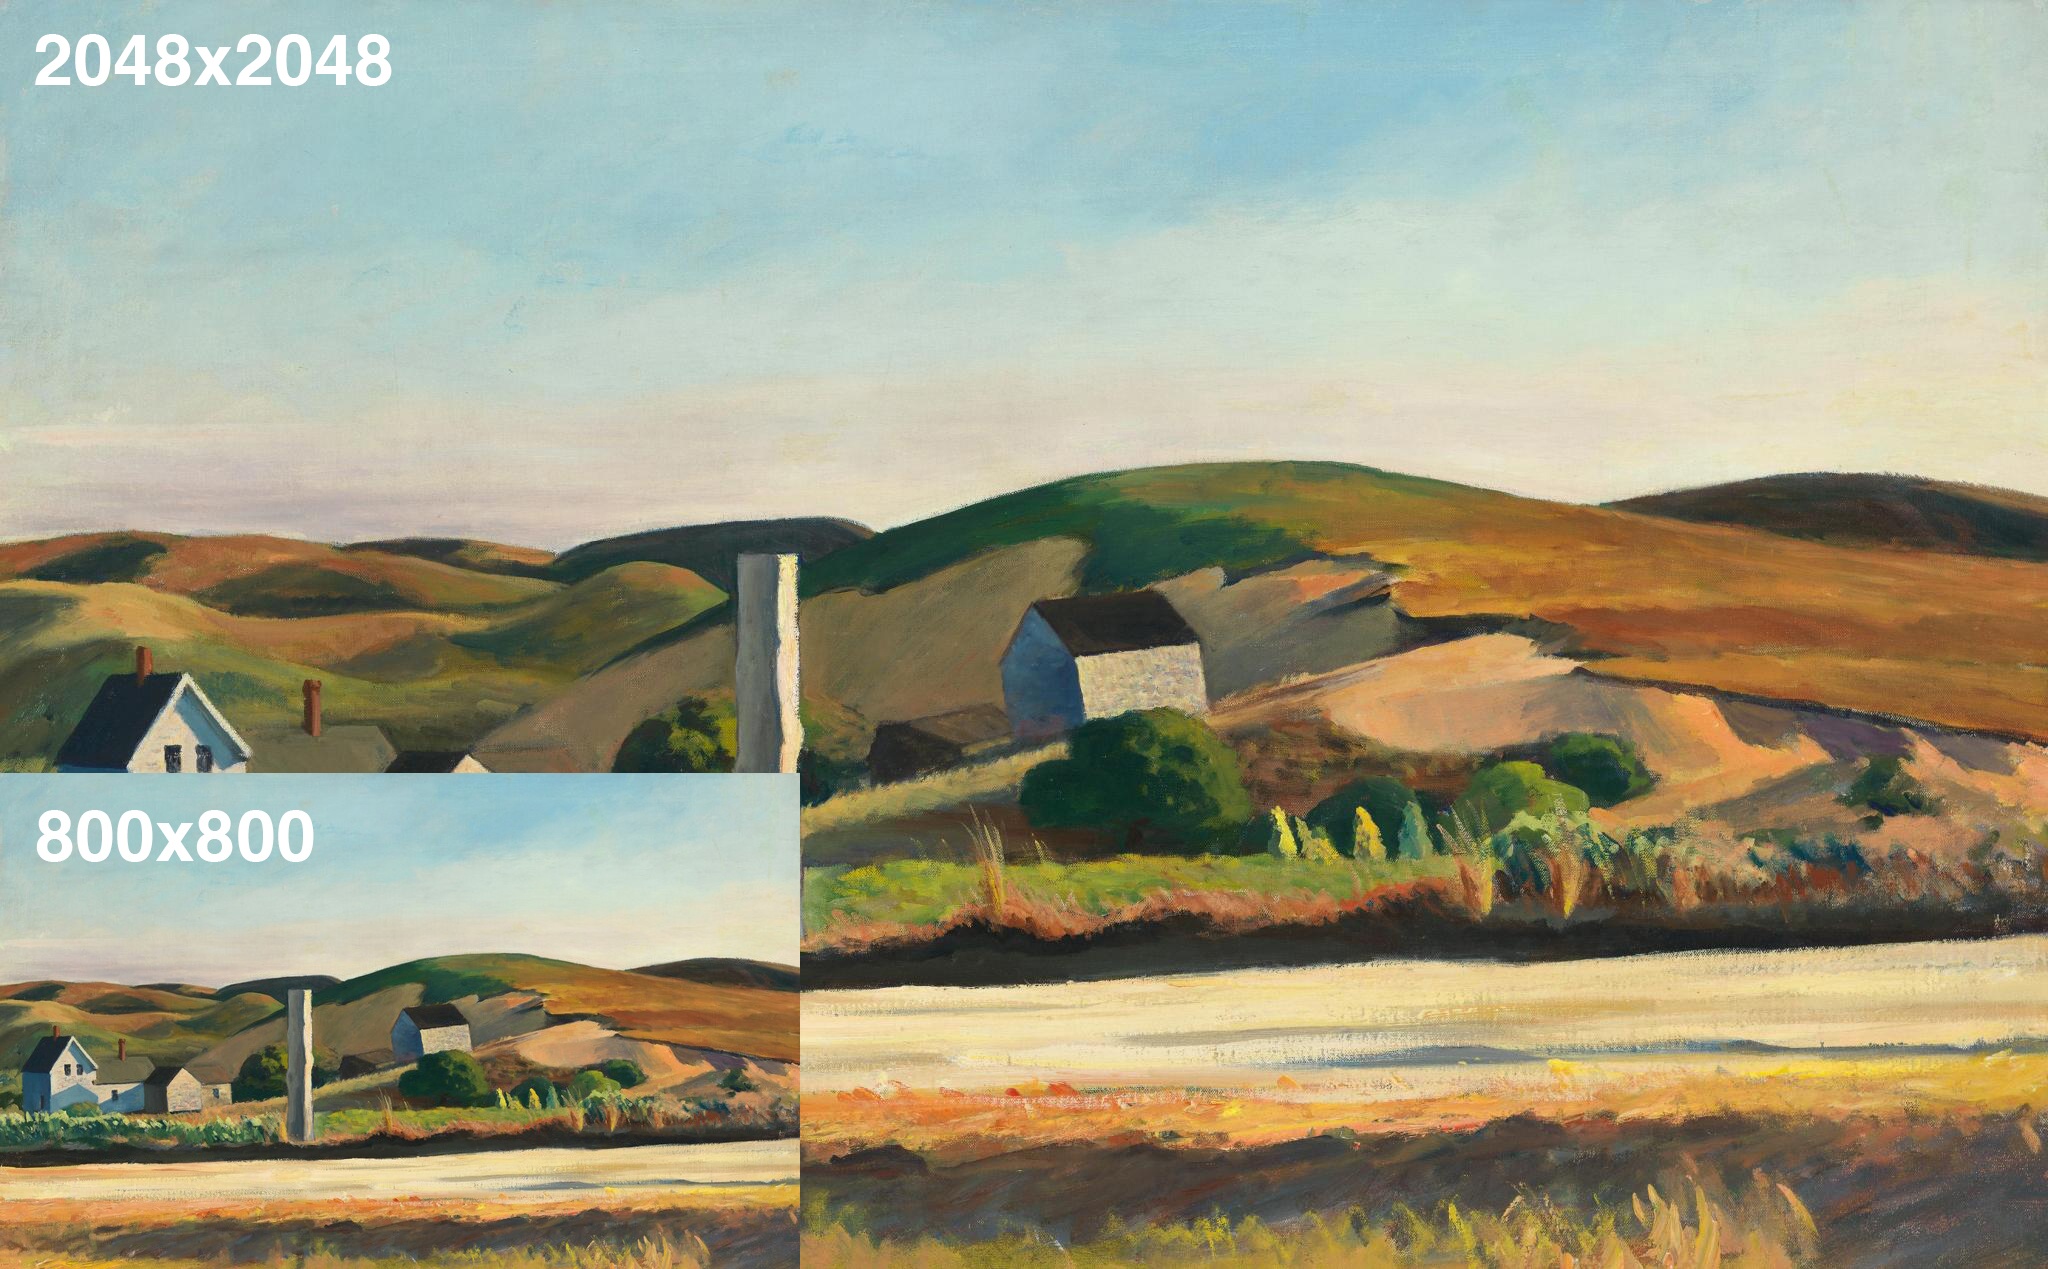 One smaller image of a Hopper painting of houses and rolling hills labeled 800x800 overlays a much larger one labeled 2048x2048.